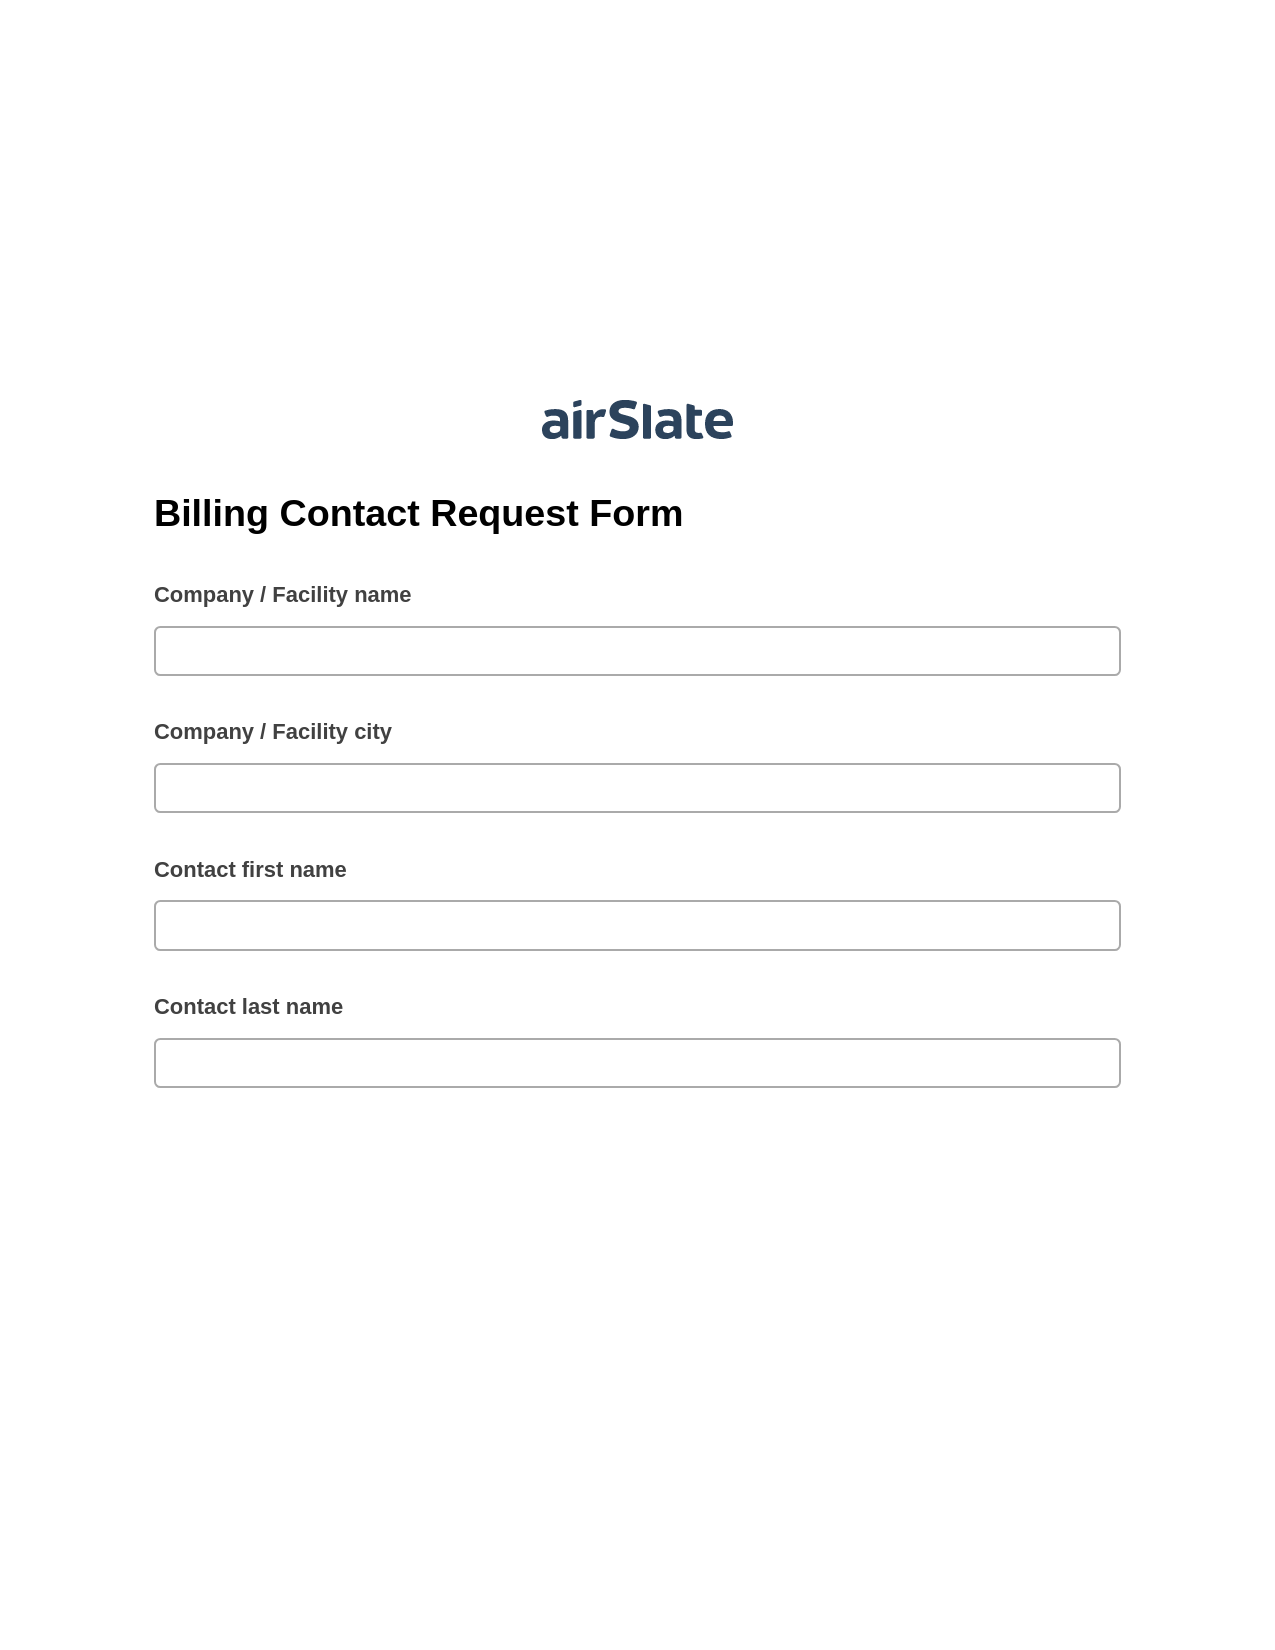 Multirole Billing Contact Request Form Pre-fill Dropdown from Airtable, Lock the slate bot, Post-finish Document Bot